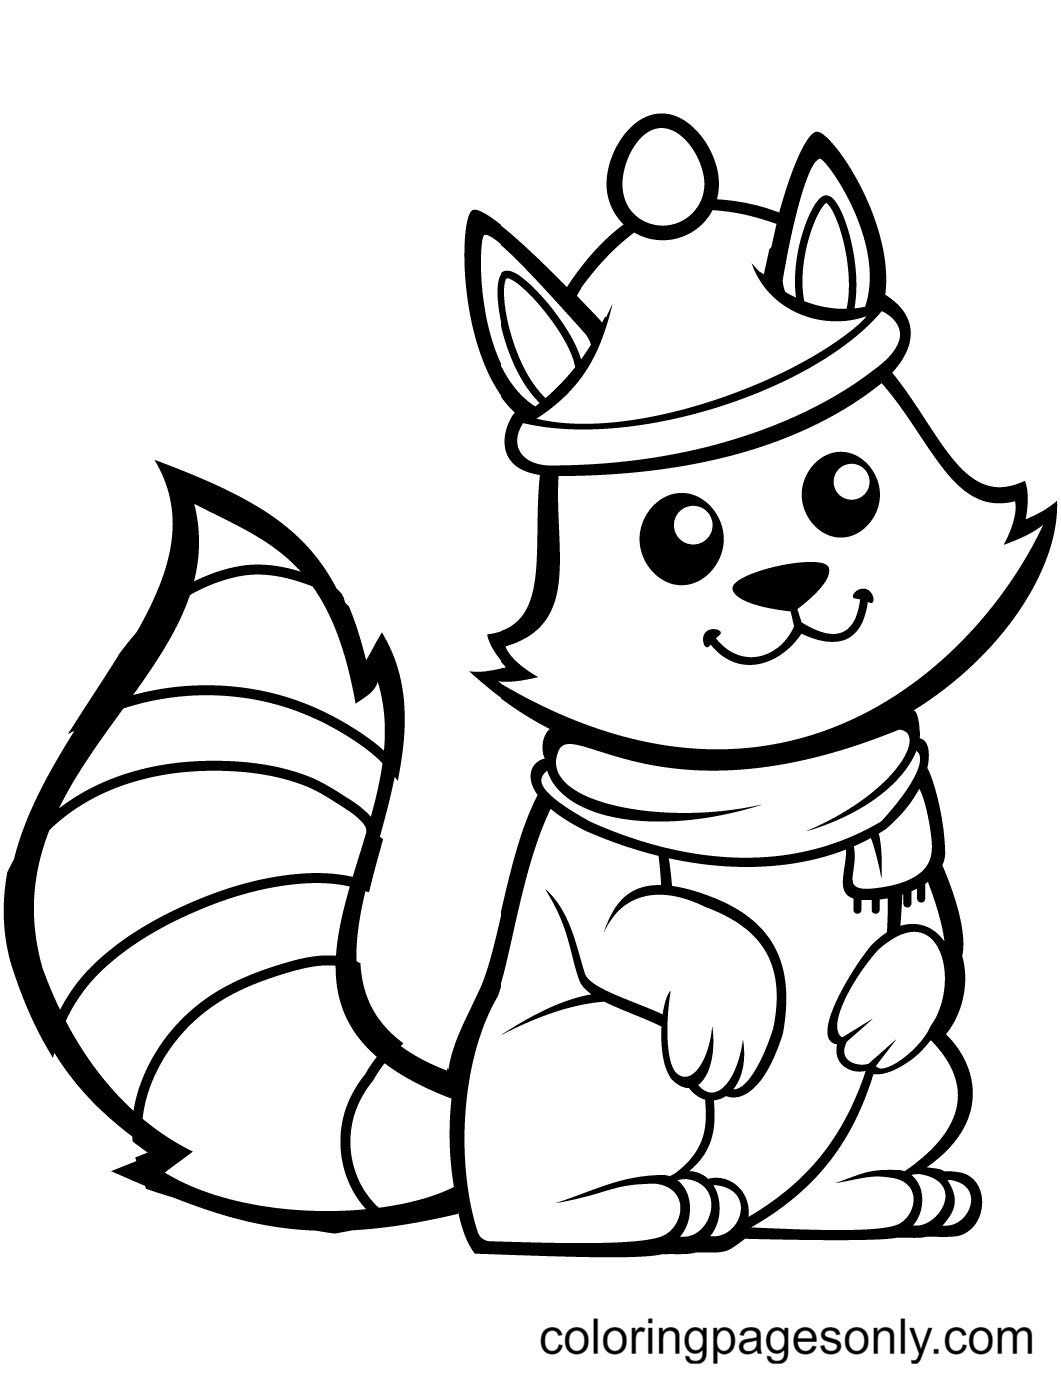 Funny Squirrel in a Hat Coloring Page